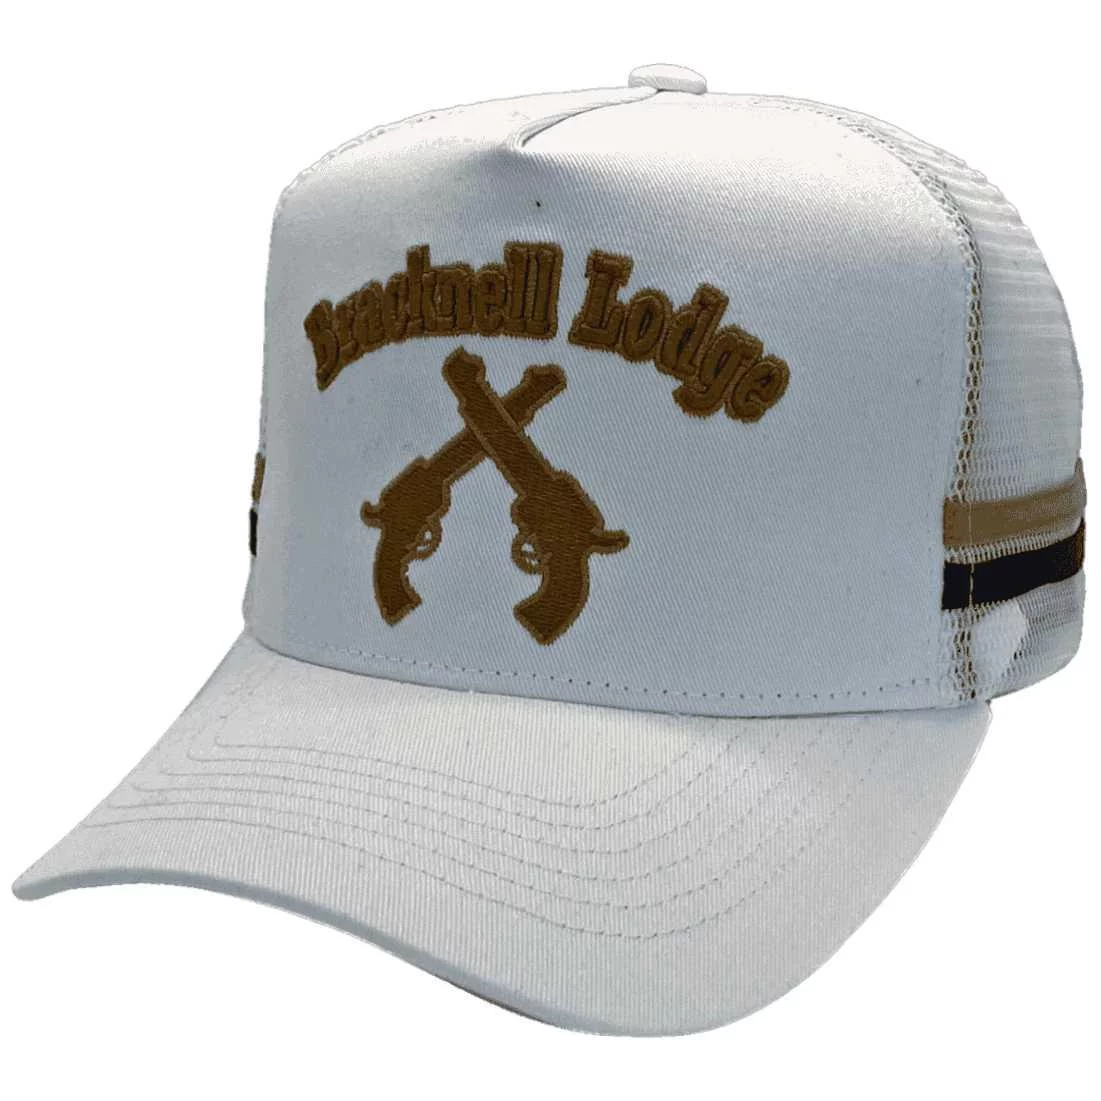 Bracknell Lodge Wedding Venue Wyreema Qld HP Midrange Aussie Trucker Hat with Australian Head Fit Crown and Double Side Bands White Gold